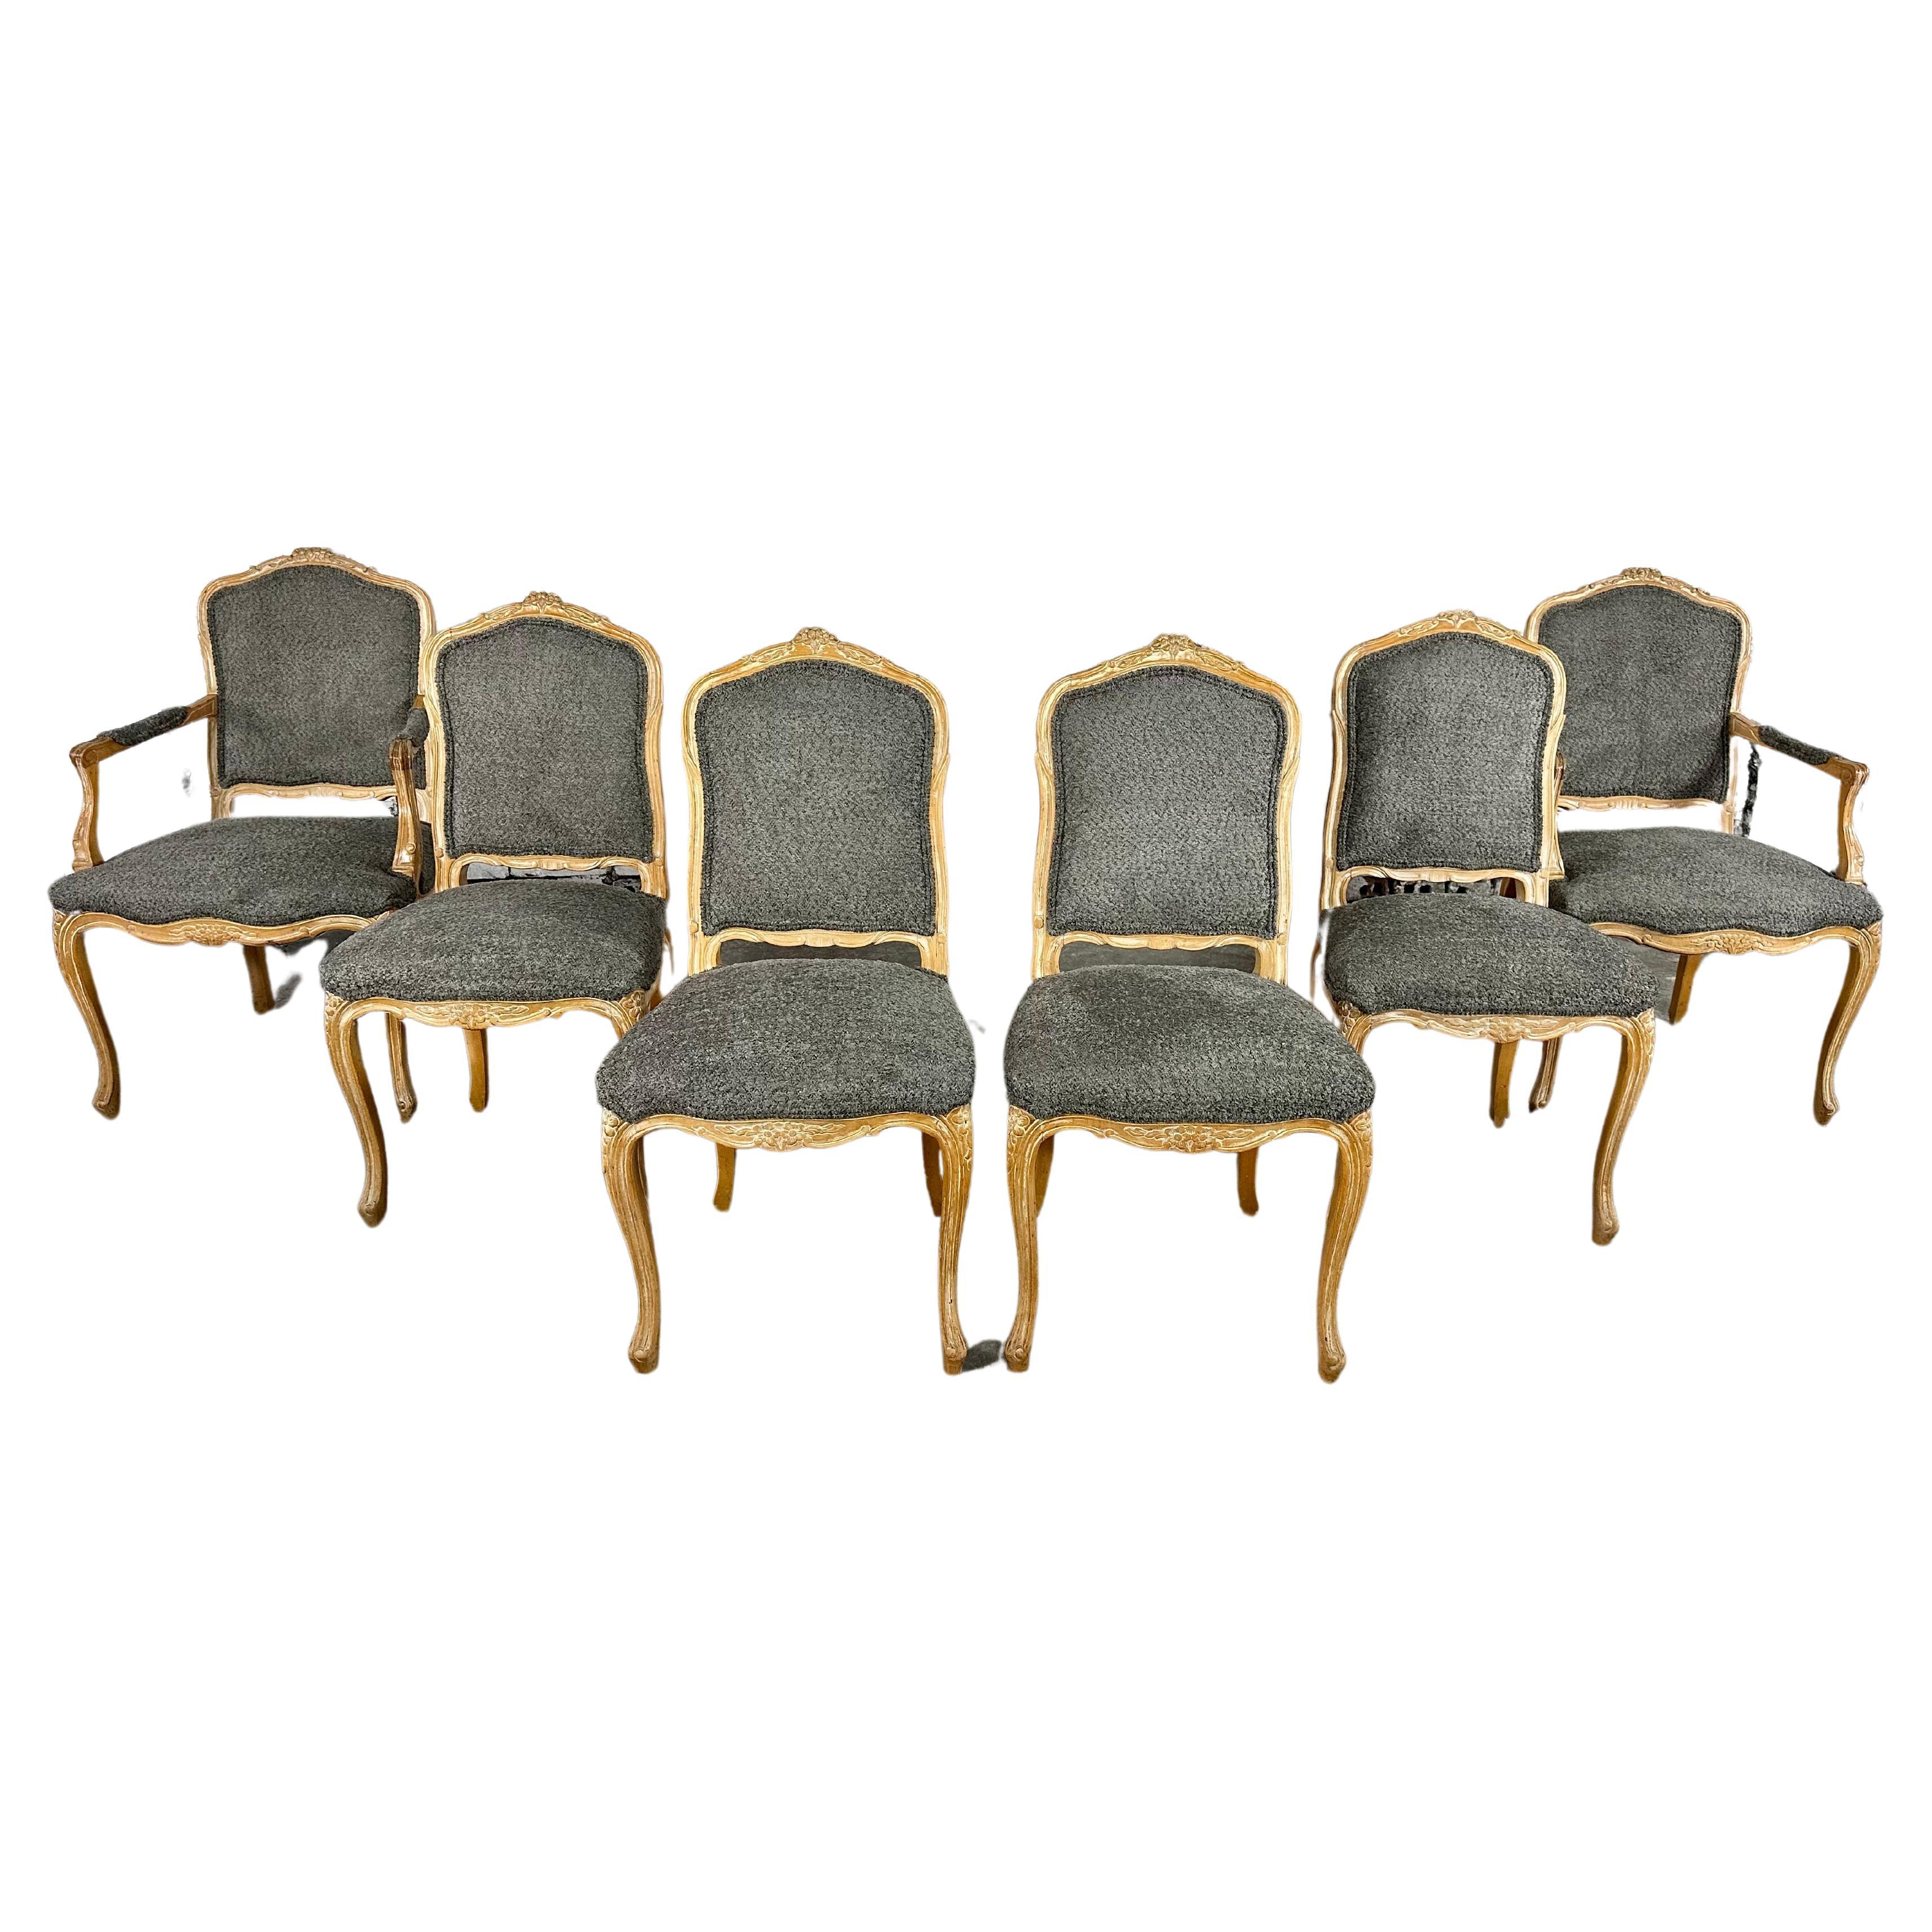 Set of 6 Reupholstered French Louis XV Dining Chairs